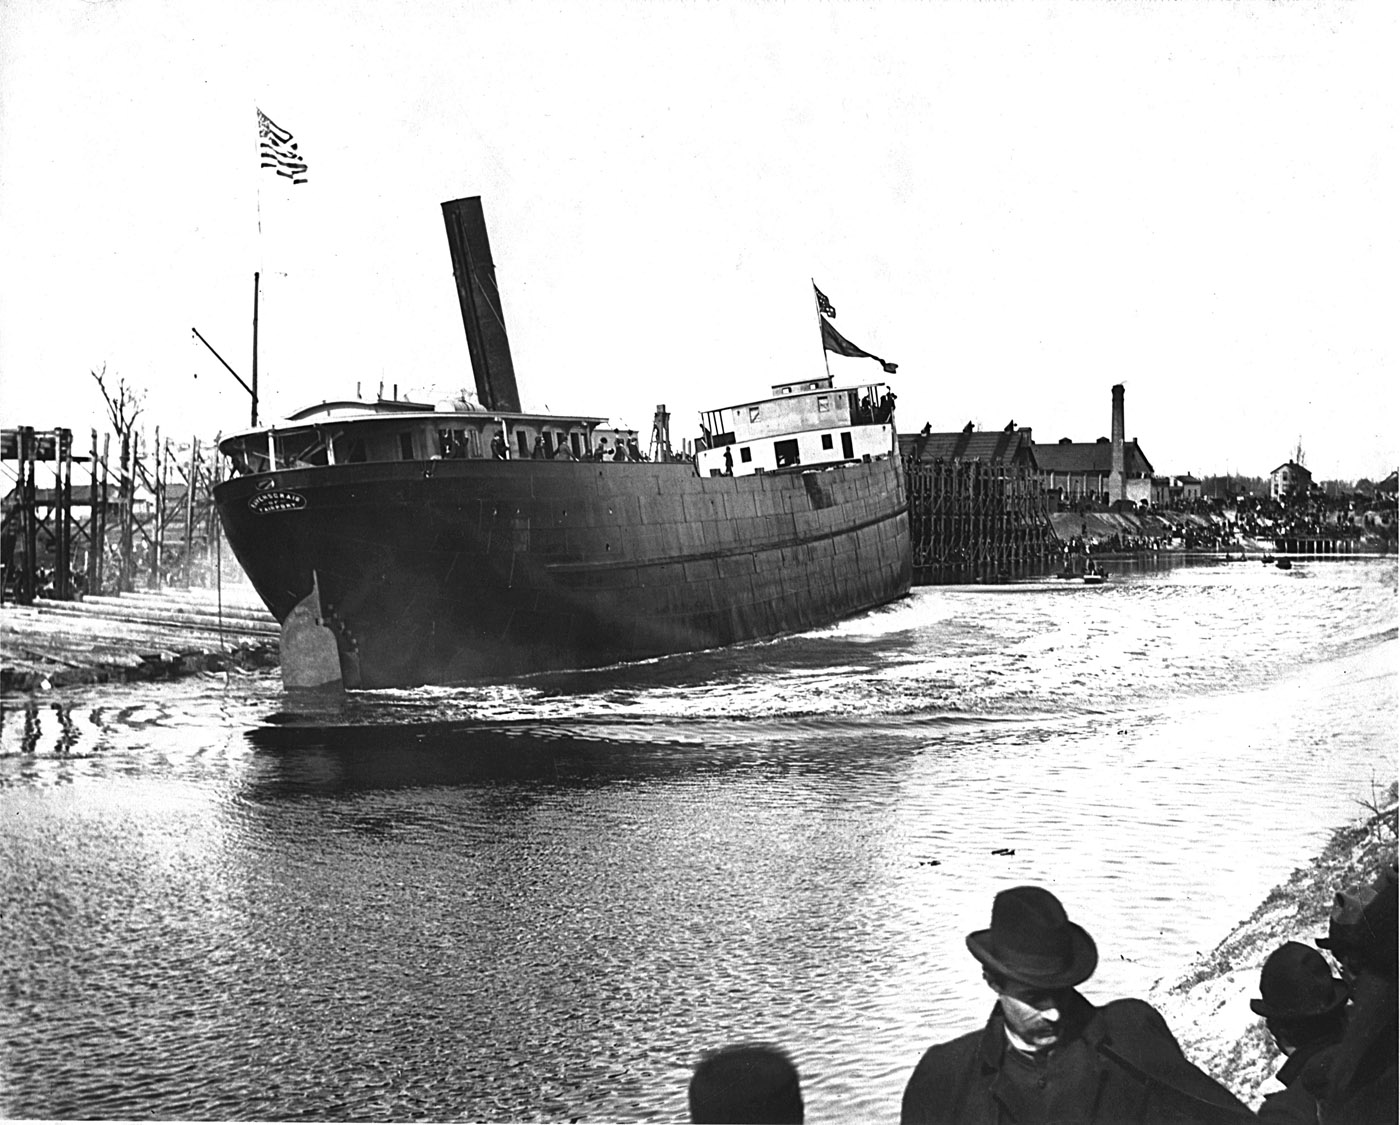 The 251 foot Great Lakes steamer Ravenscraig was launched at the Black River yard of the Jenks Ship Building Company in Port Huron, Michigan, sometime in 1900.  From this same yard Jenks launched their only passenger ship, the Eastland, in May 1903.  In 1915 the Eastland would become infamous when she capsized in the Chicago river with the loss of 844 lives. The Ravenscraig sailed the Great Lakes until 1907 when she was sold for off-lakes use. View full size.